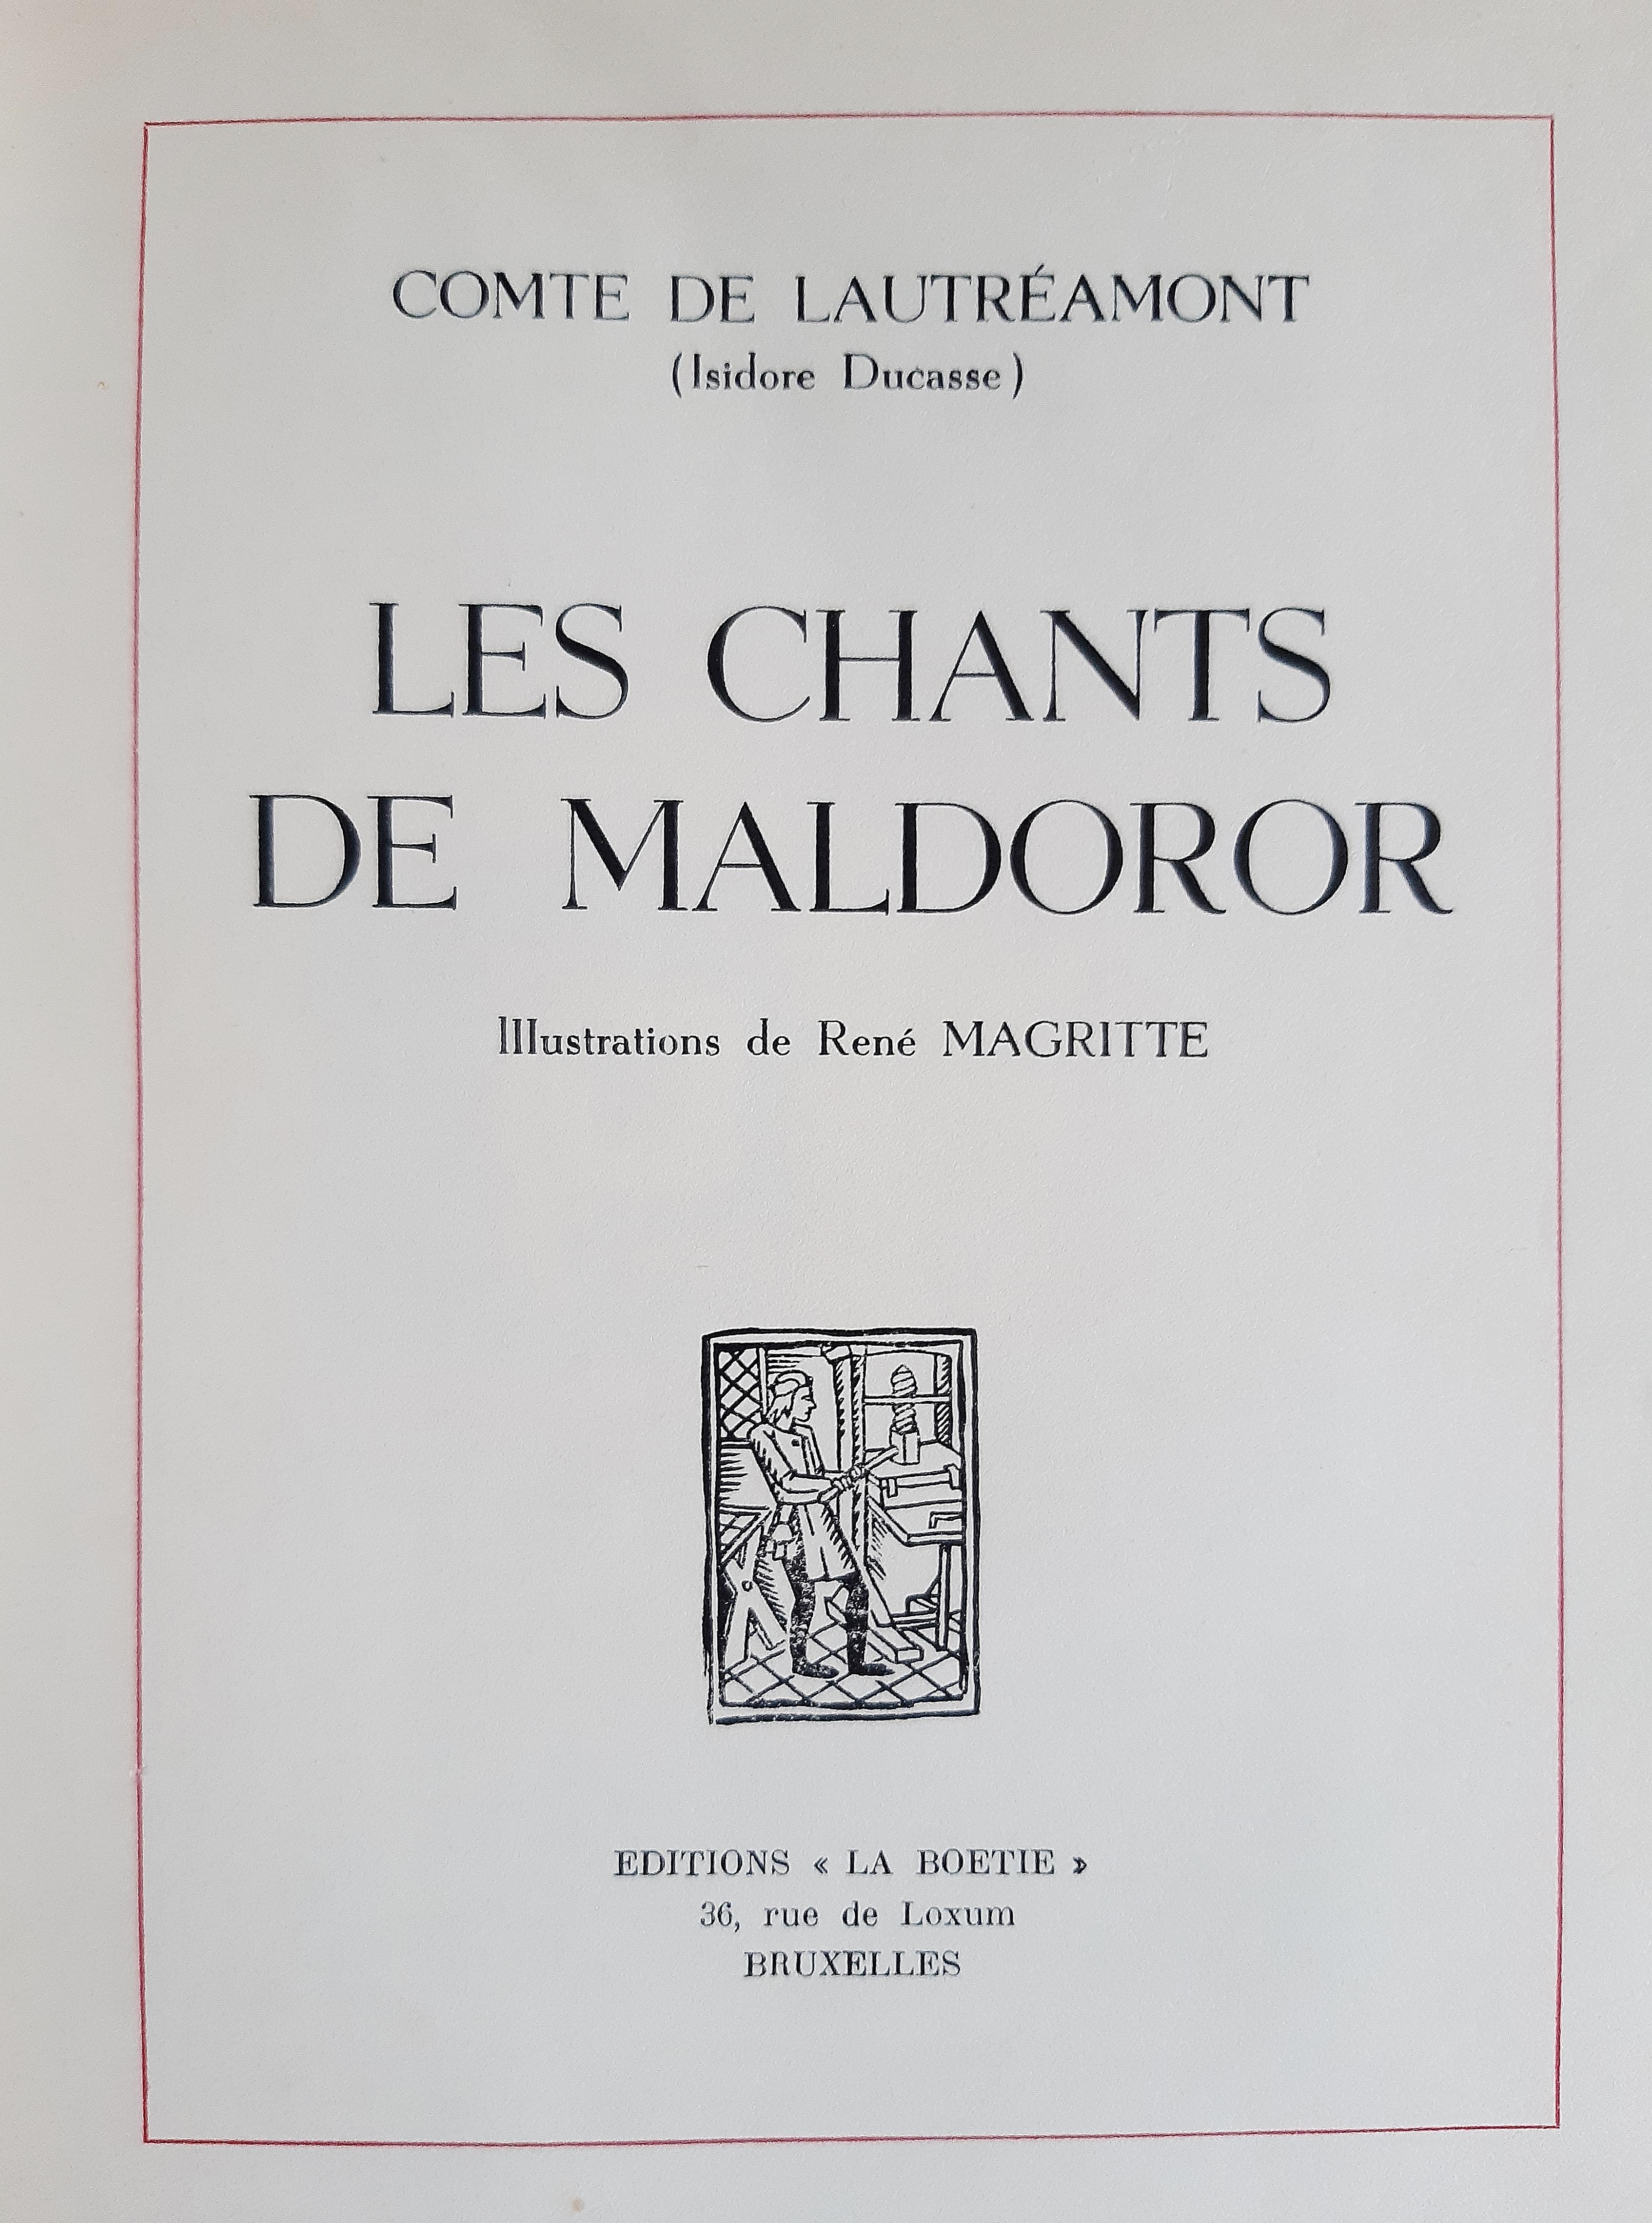 Chants de Maldoror - Rare Book Illustrated by René Magritte - 1948 For Sale 2